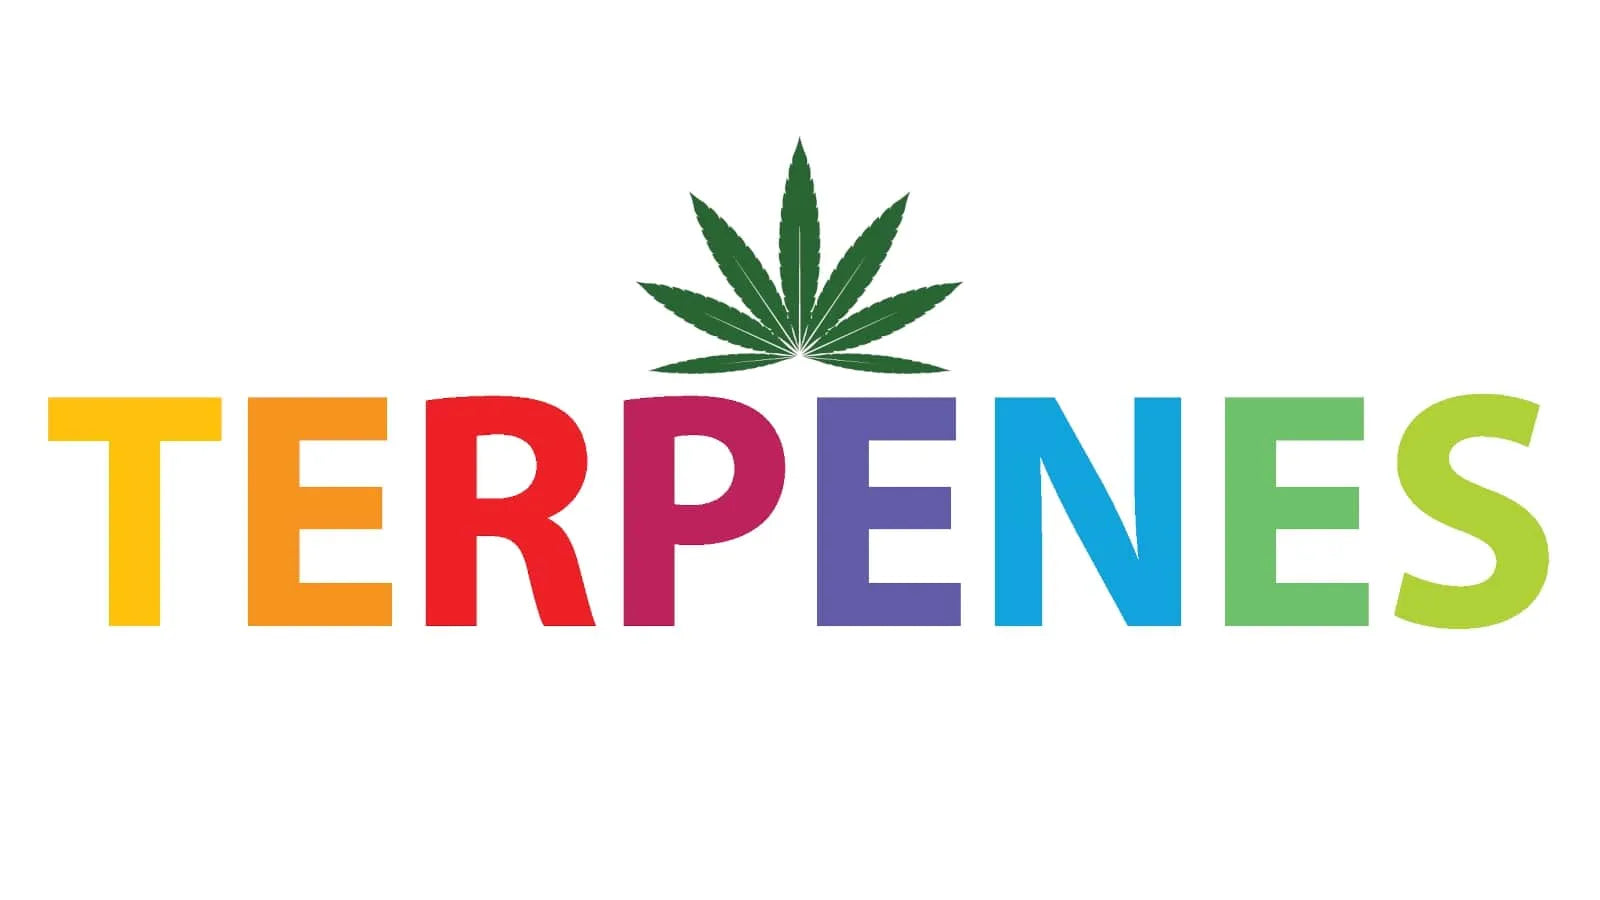 What are Terpenes and their Medicinal Uses?